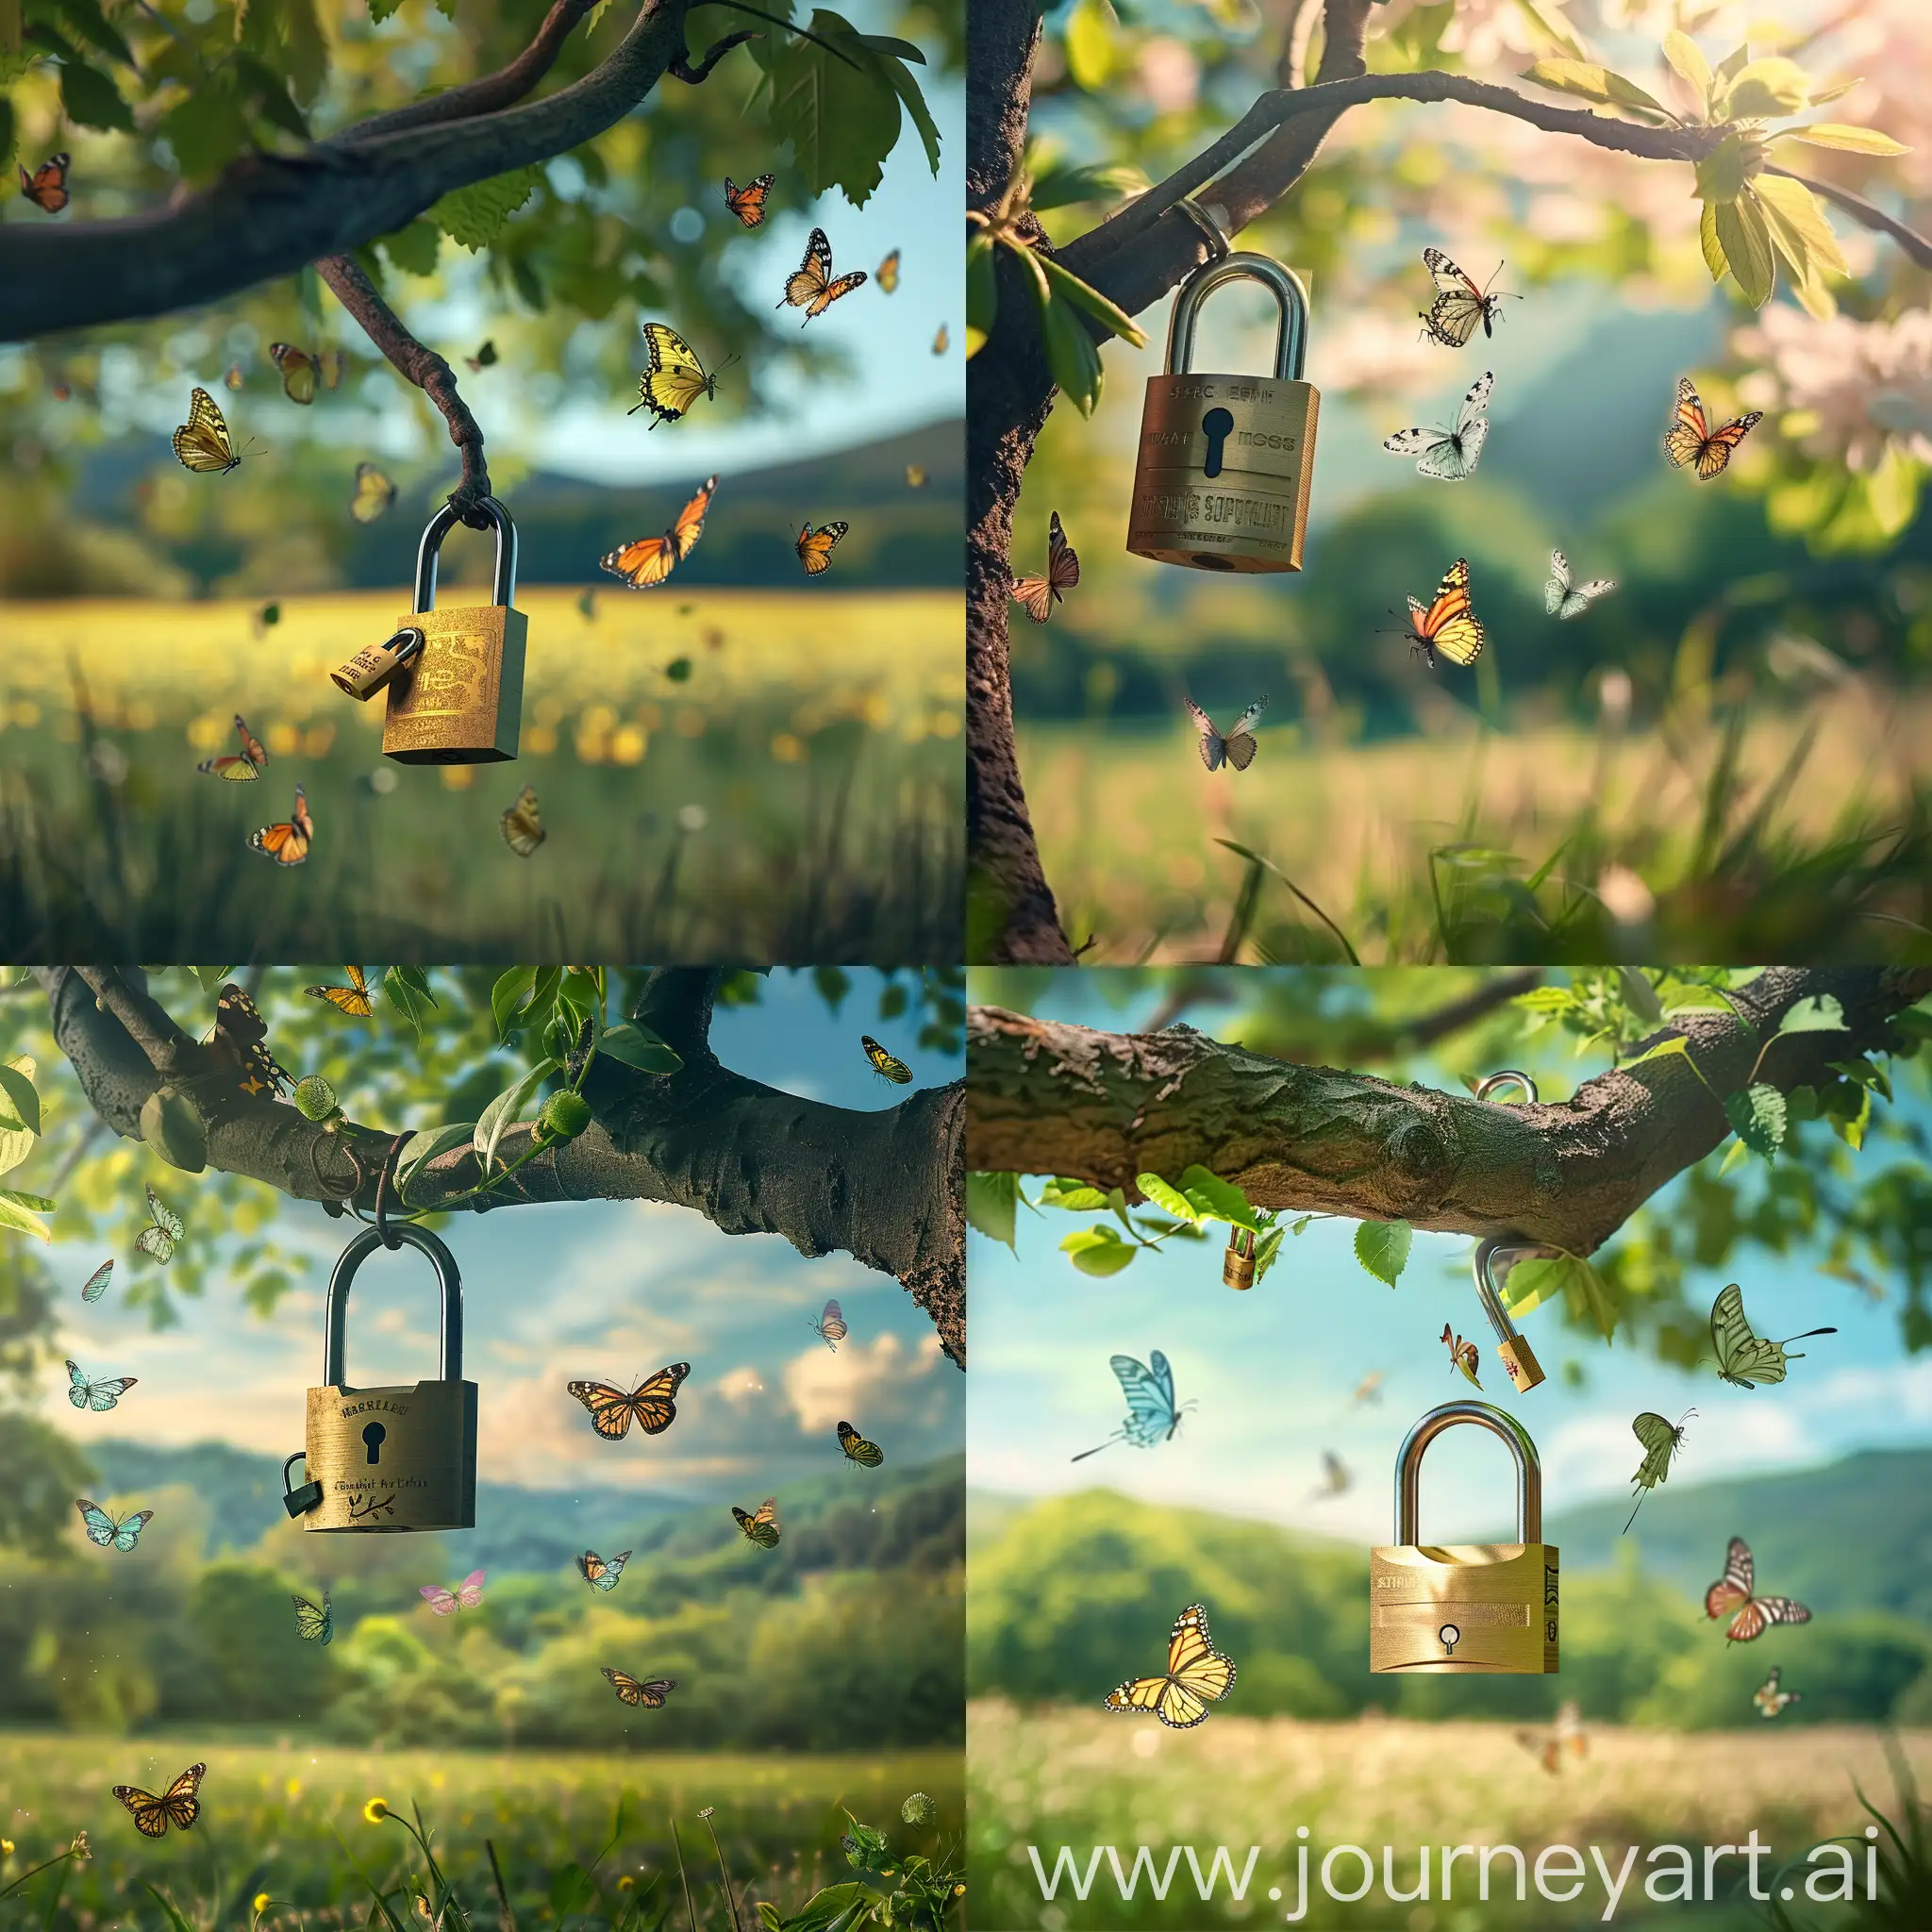 Butterflies-and-Padlock-in-a-Serene-Meadow-Symbolizing-Freedom-and-Security